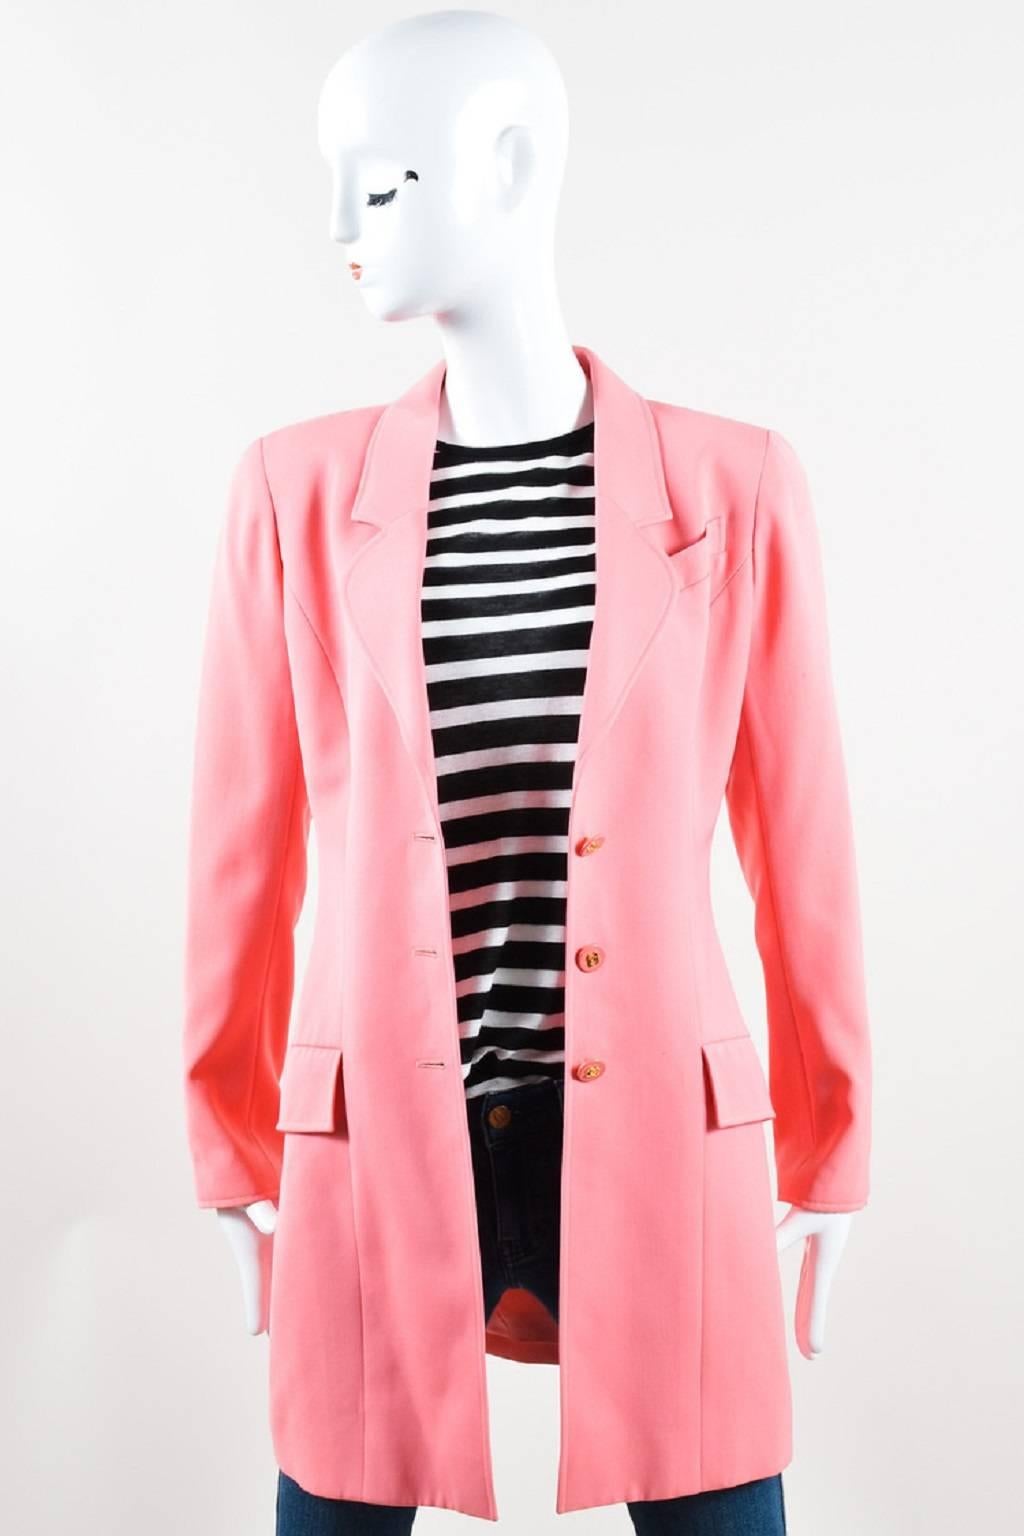 Long coral pink wool jacket secures with gold tone 'CC' buttons in front. Long sleeves have padded shoulders and matching buttons at openings. Two flap pockets on front. Lapel pocket is basted closed. Center back slit. Silk lined.

Color: